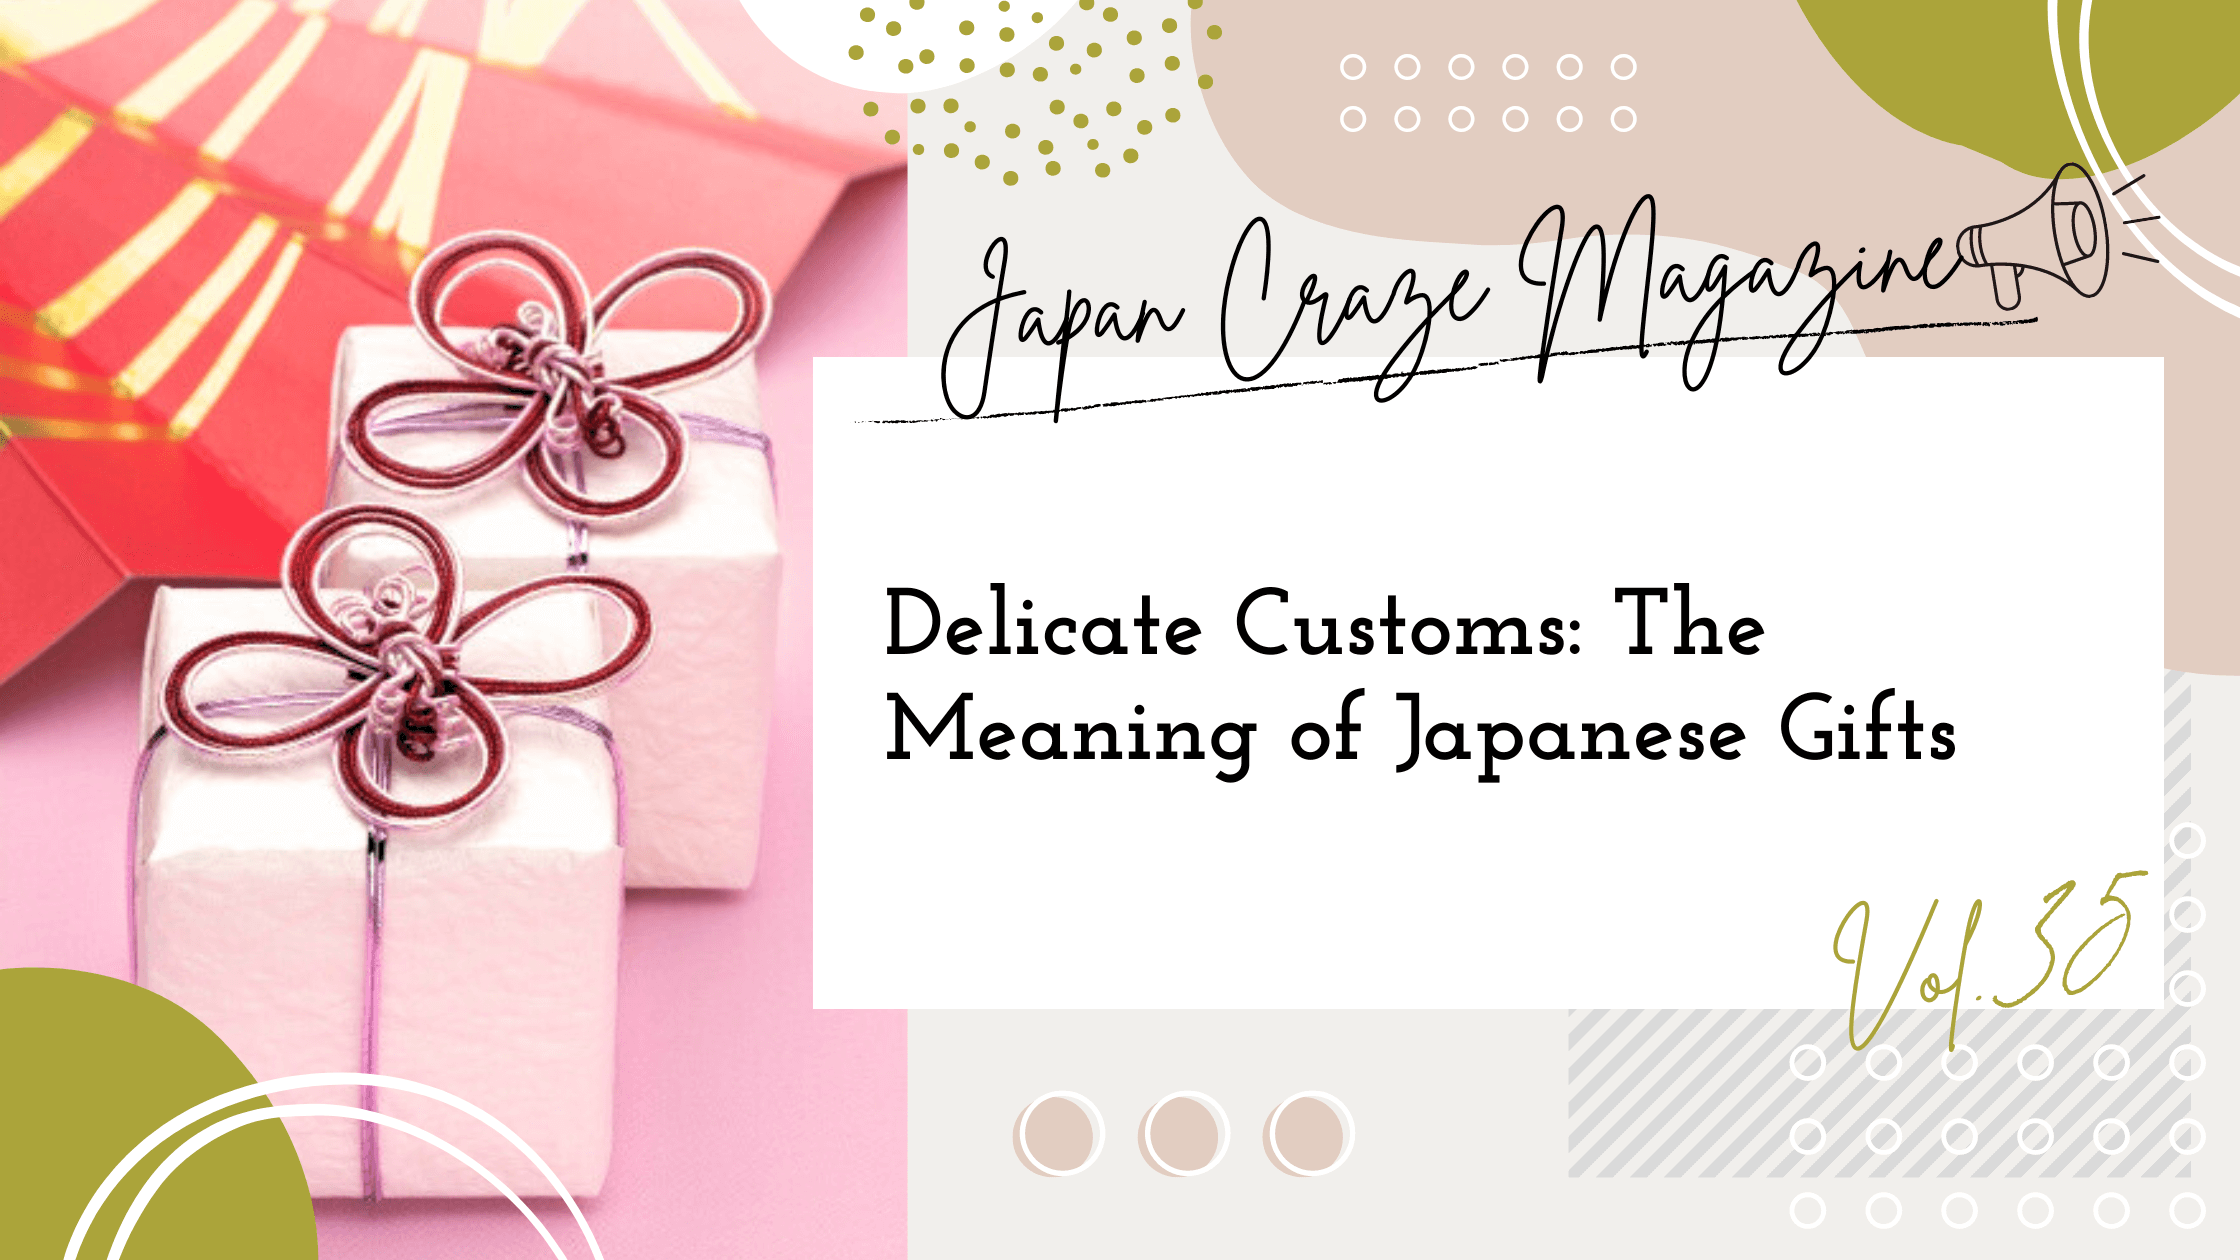 Delicate Customs: The Meaning of Japanese Gifts - JAPAN CRAZE Magazine